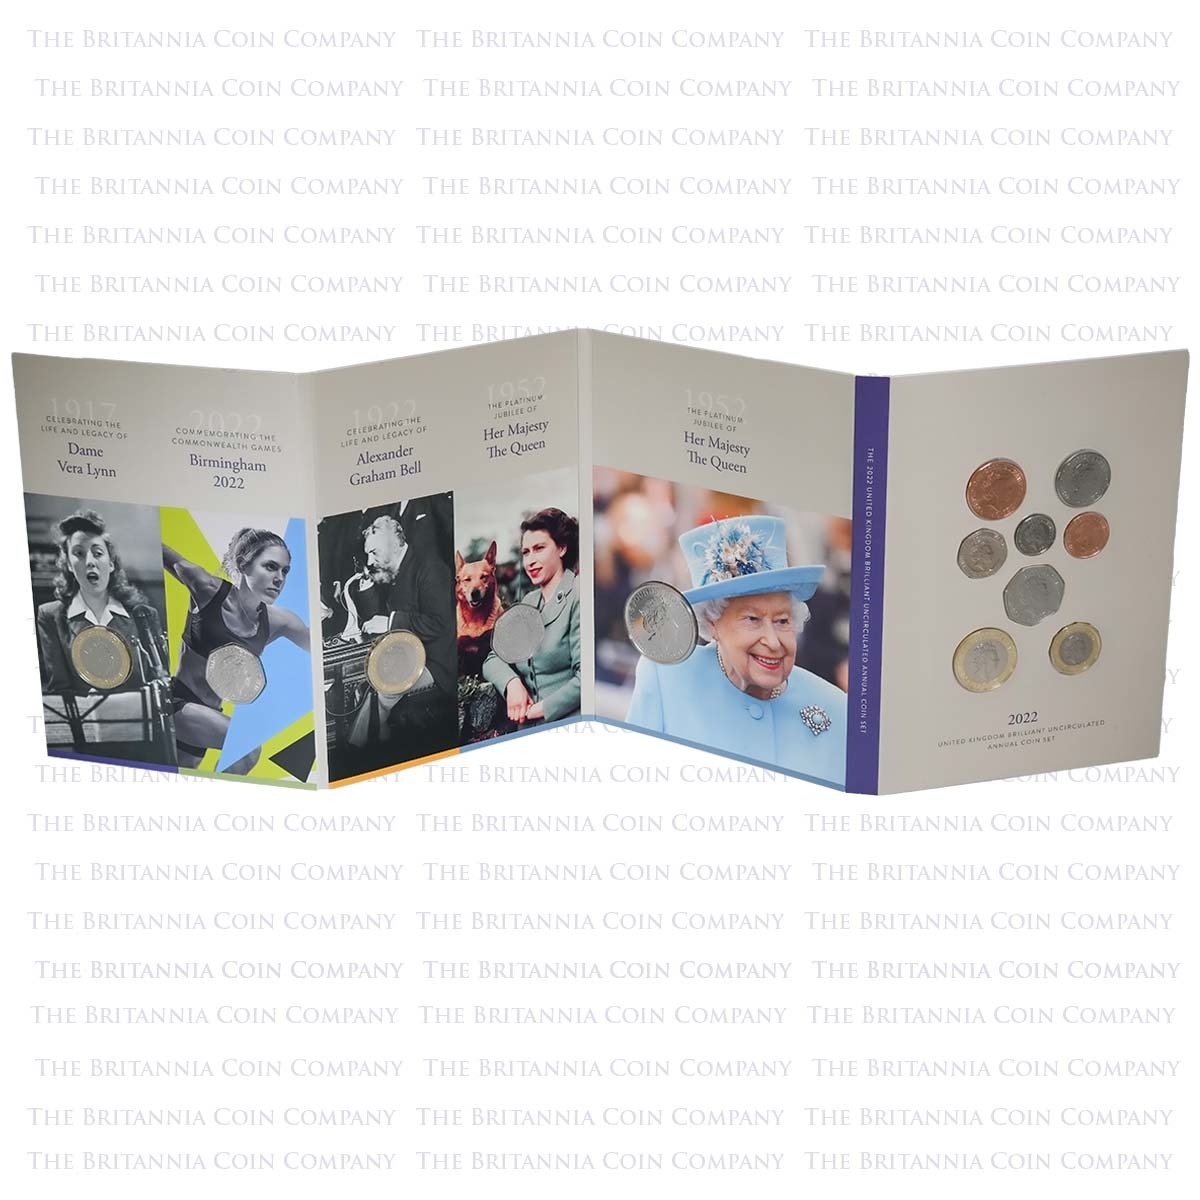 DU22 2022 Annual 13 Coin Set Brilliant Uncirculated Platinum Jubilee Fold Out